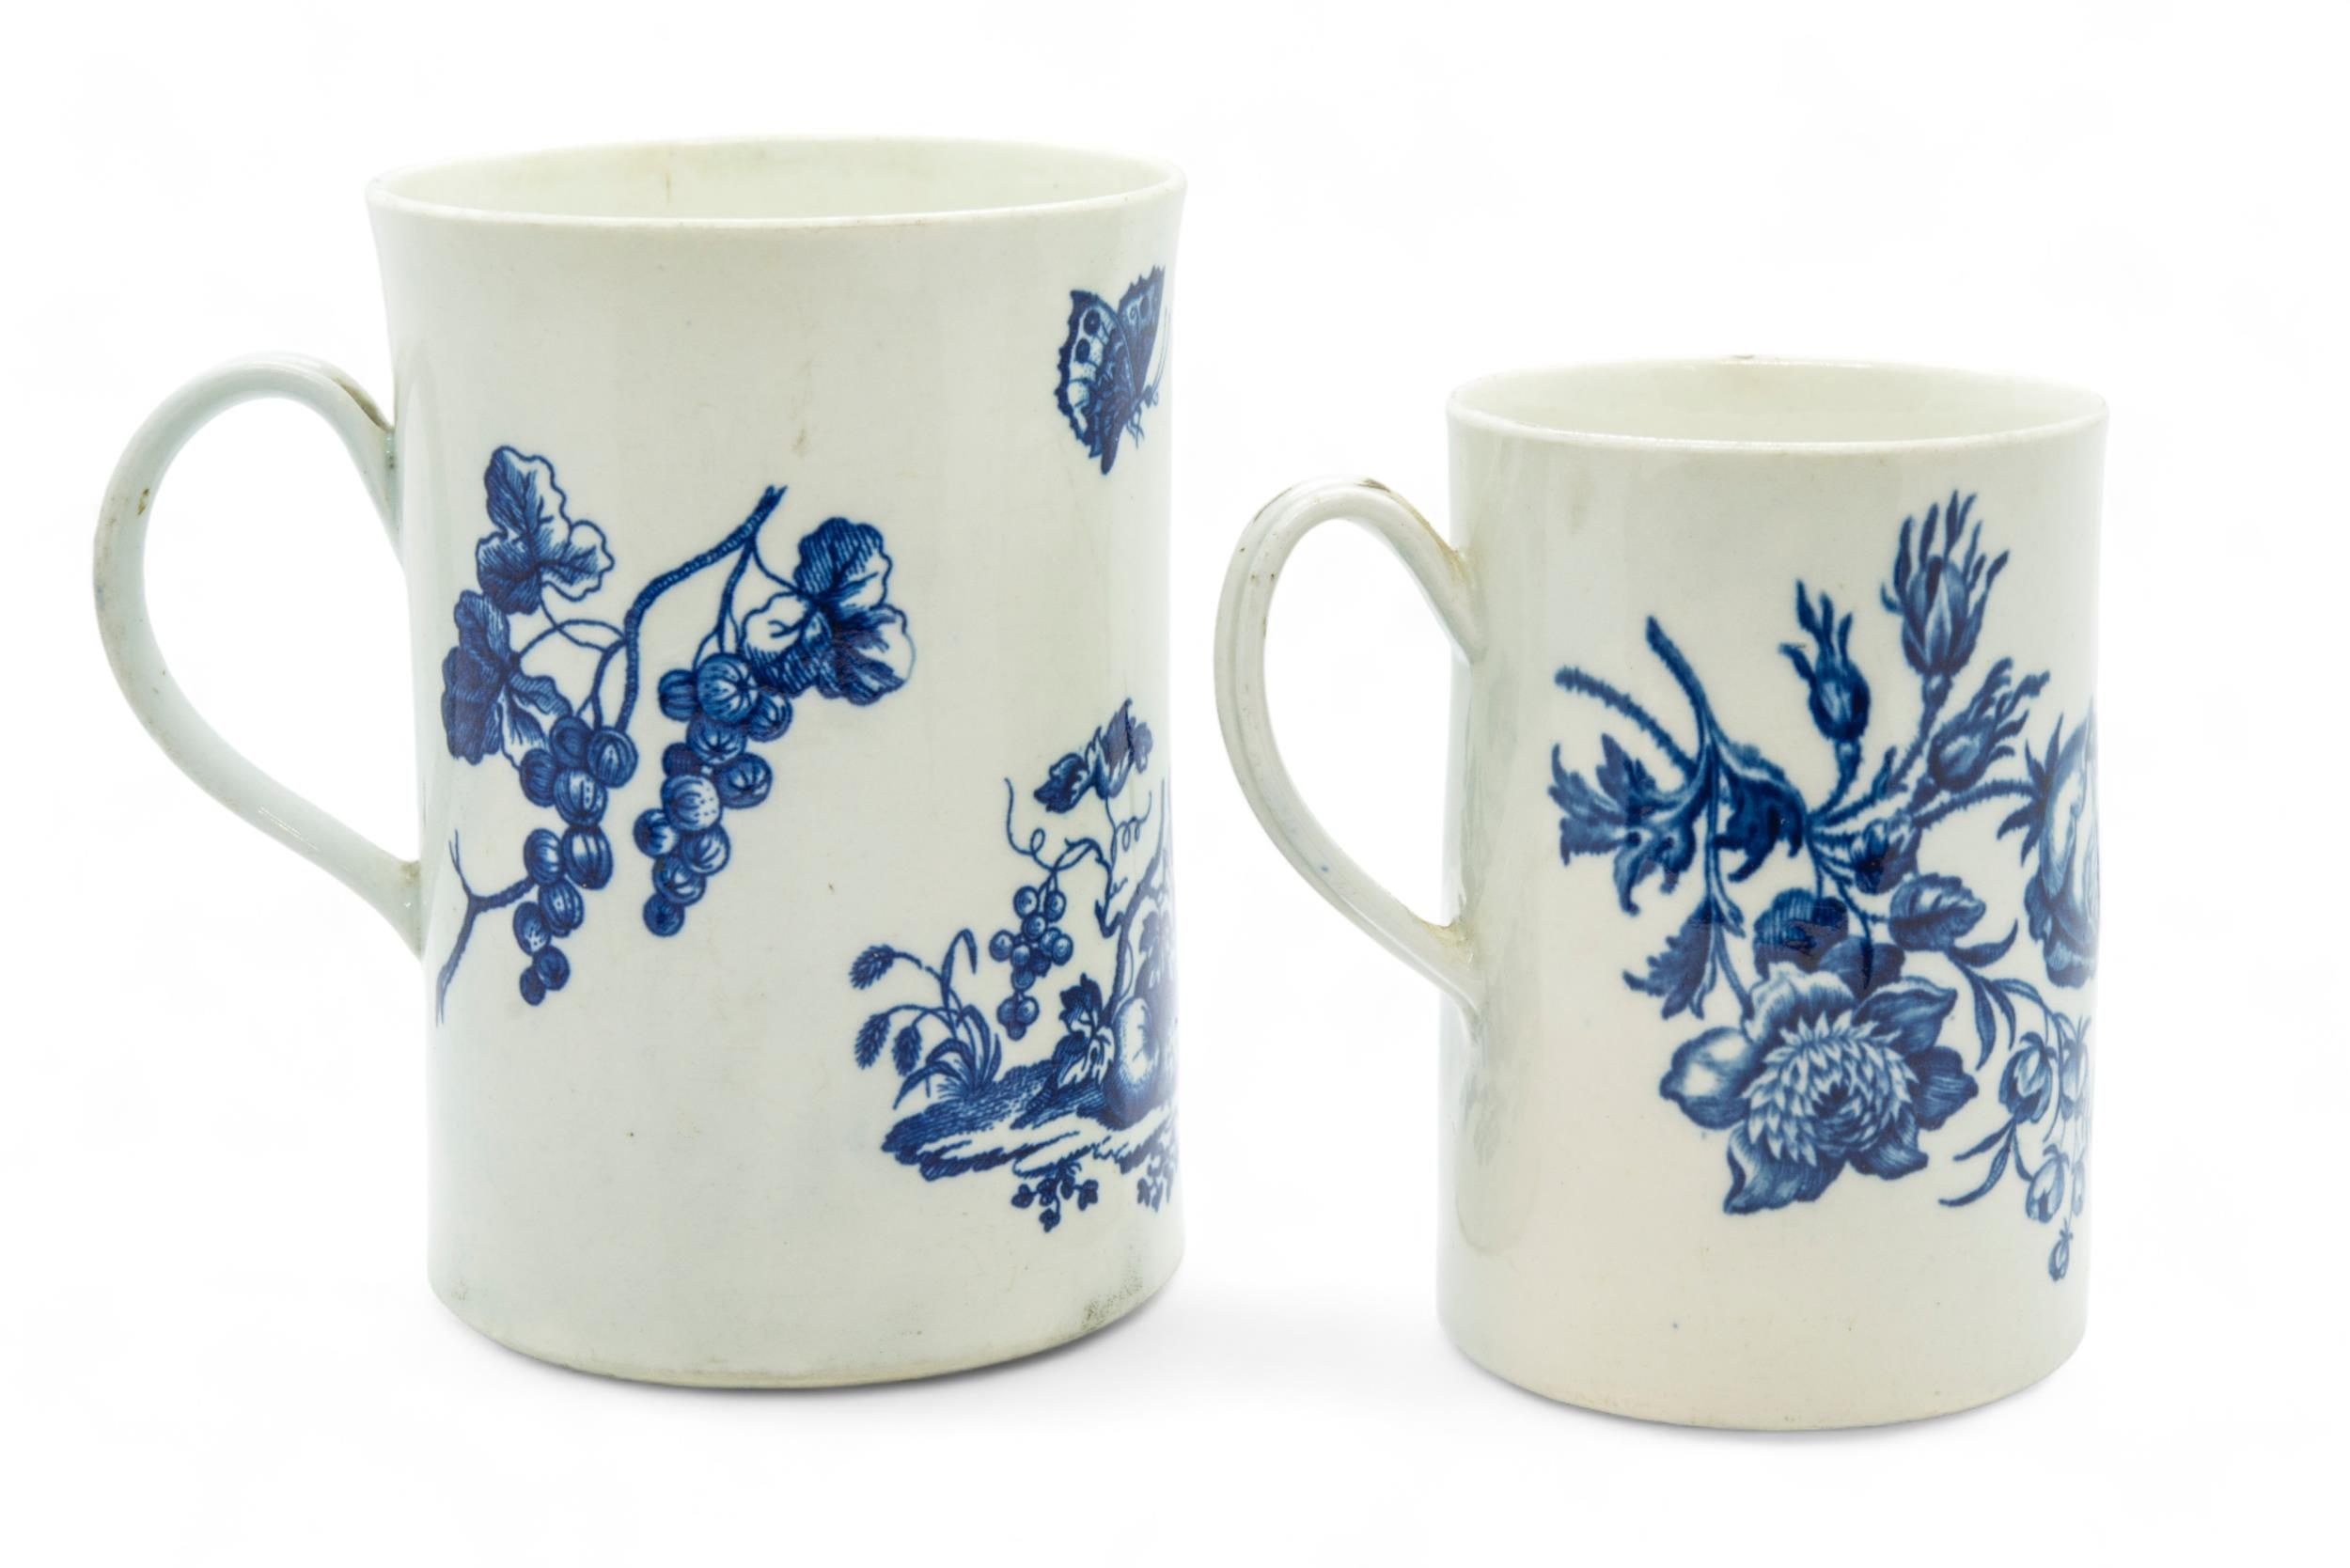 TWO 18TH CENTURY WORCESTER BLUE PRINTED TANKARDS One printed with a parrot and fruit and with